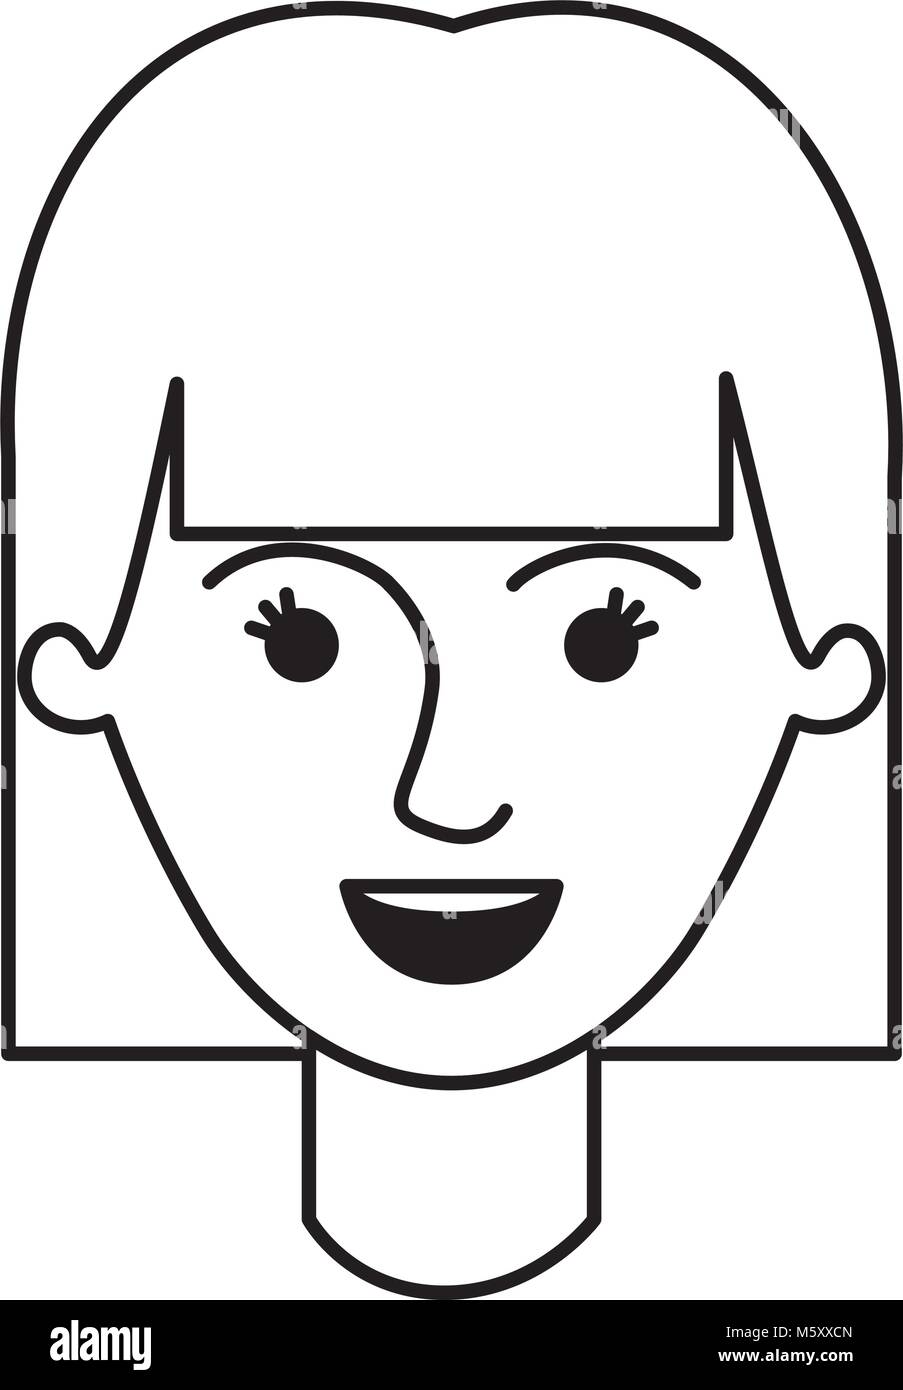 female face with mushroom hairstyle in monochrome silhouette Stock Vector